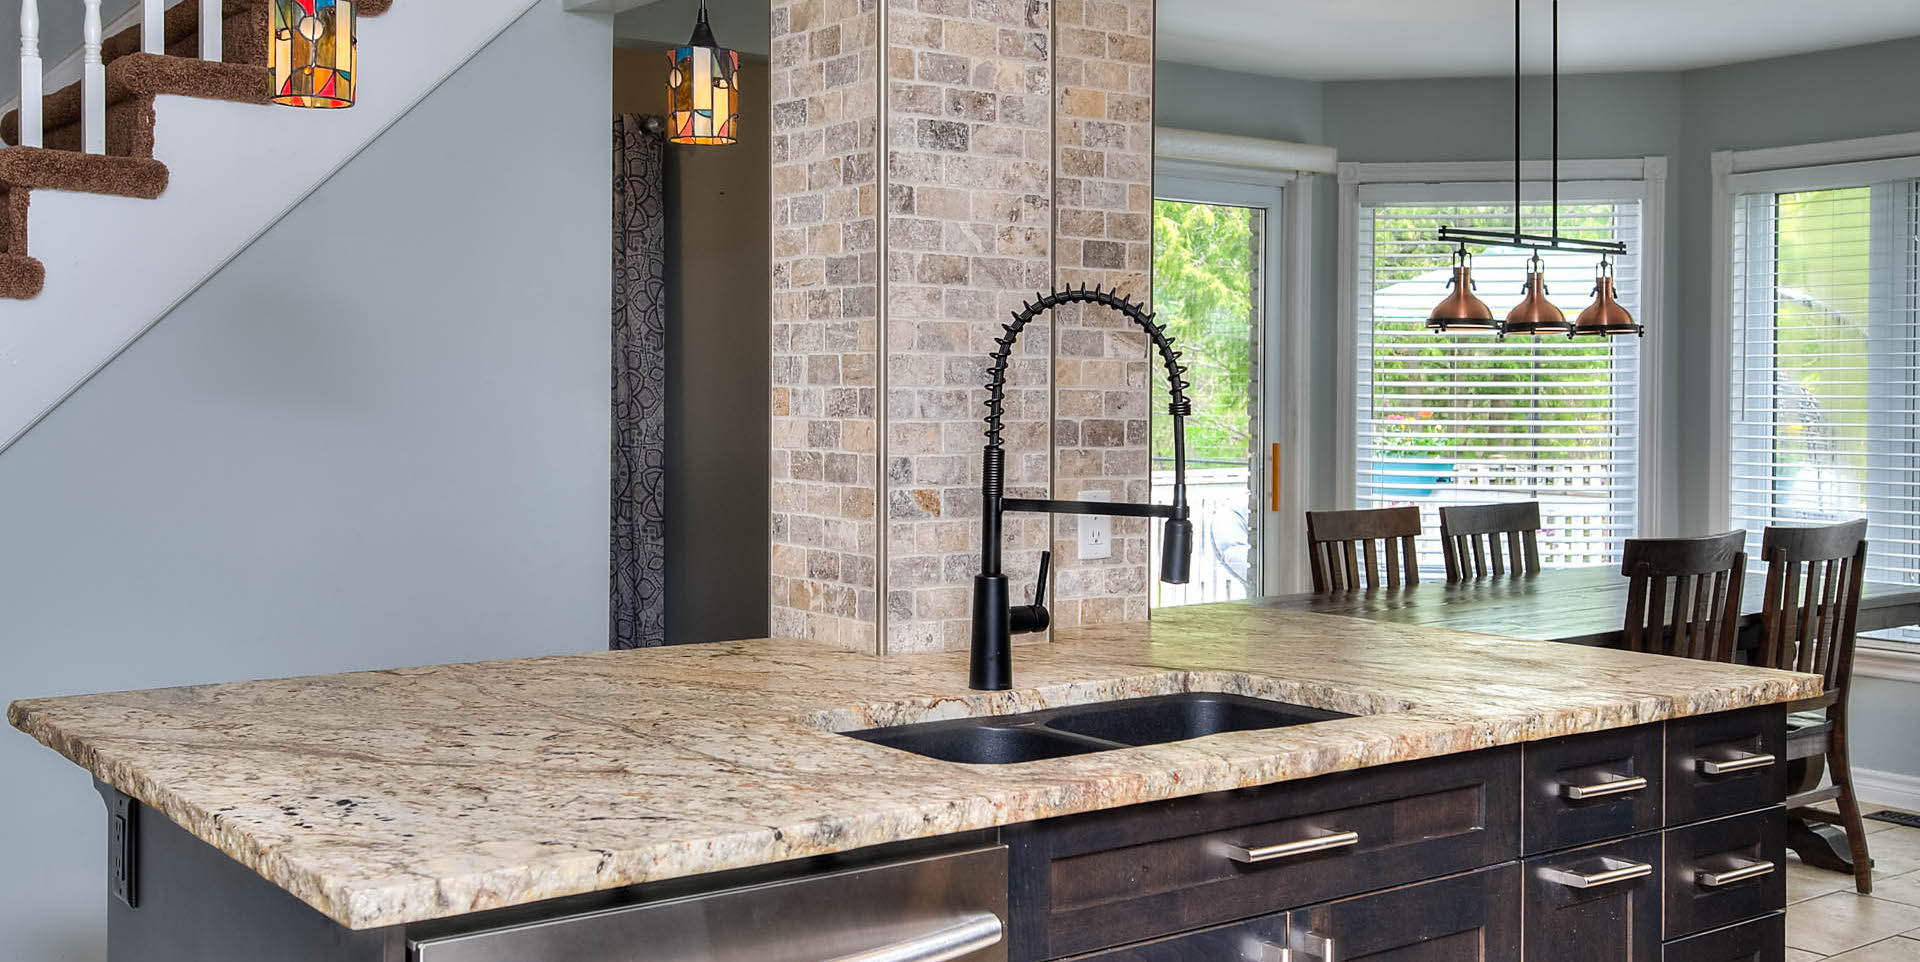 kitchen featuring tile flooring, natural light, dishwasher, pendant lighting, dark brown cabinets, and light stone countertops